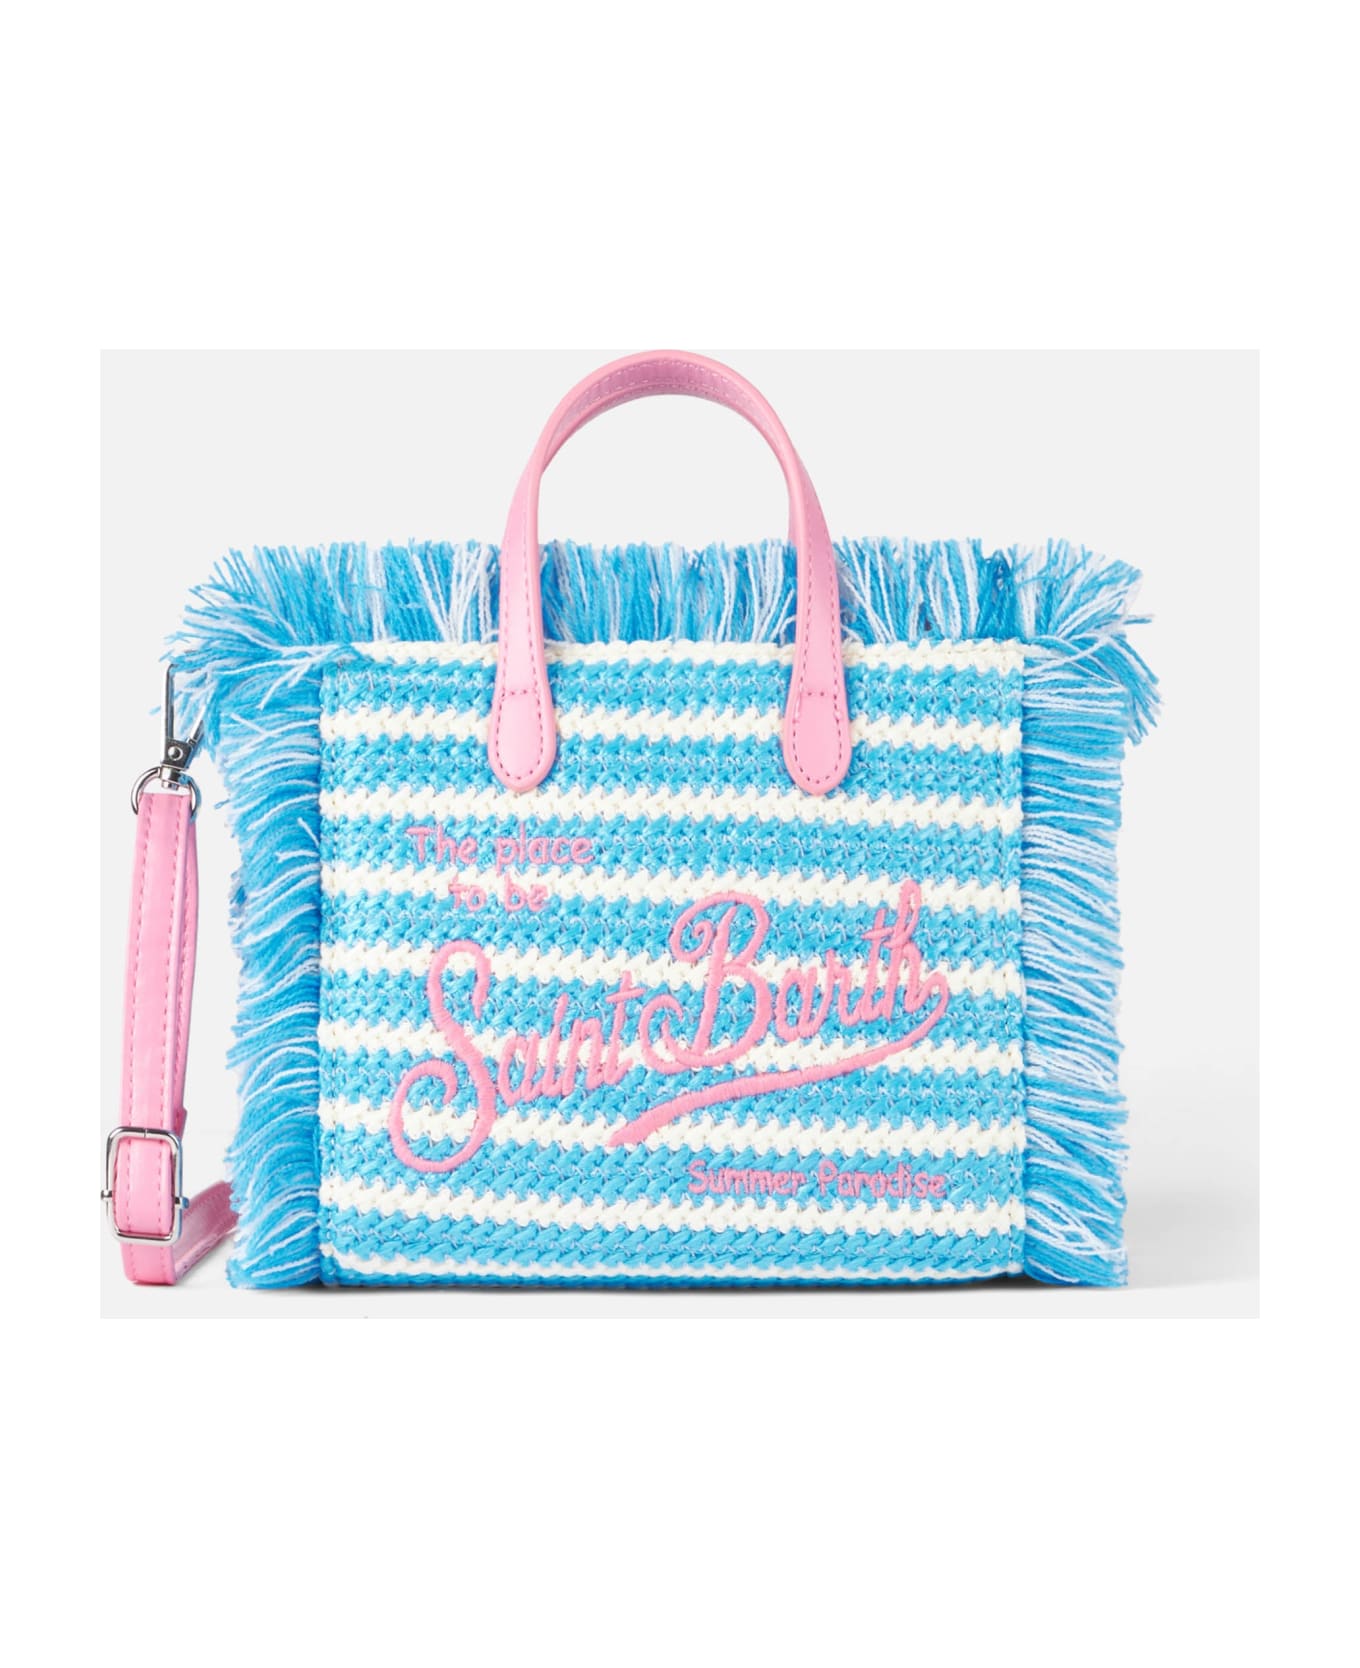 MC2 Saint Barth Mini Vanity Straw Bag With Embroidery And Stripes - SKY トートバッグ